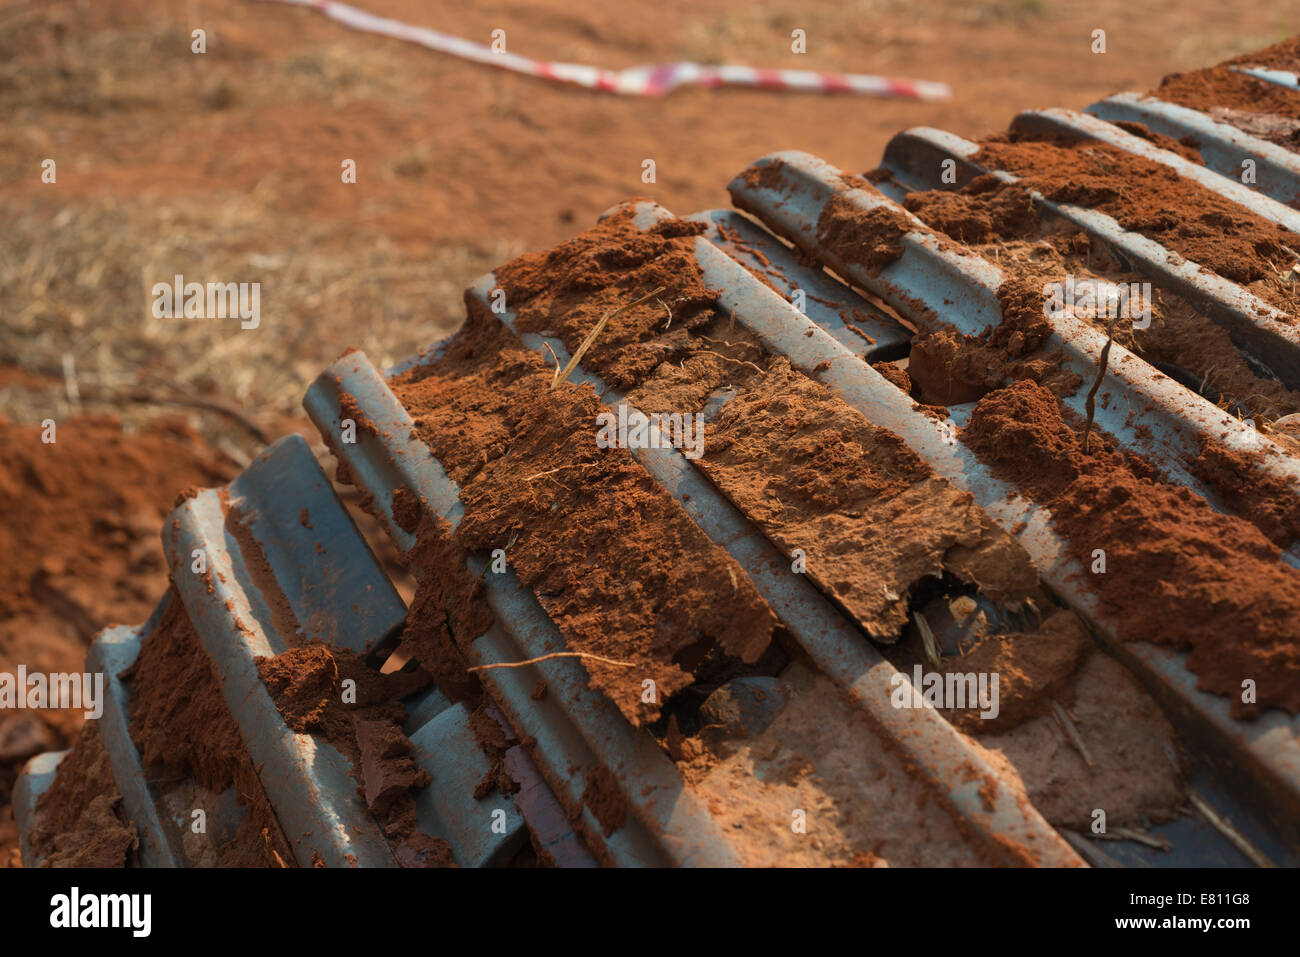 An excavator caterpillar track covered in clots of mud, dirt and laterite. Stock Photo